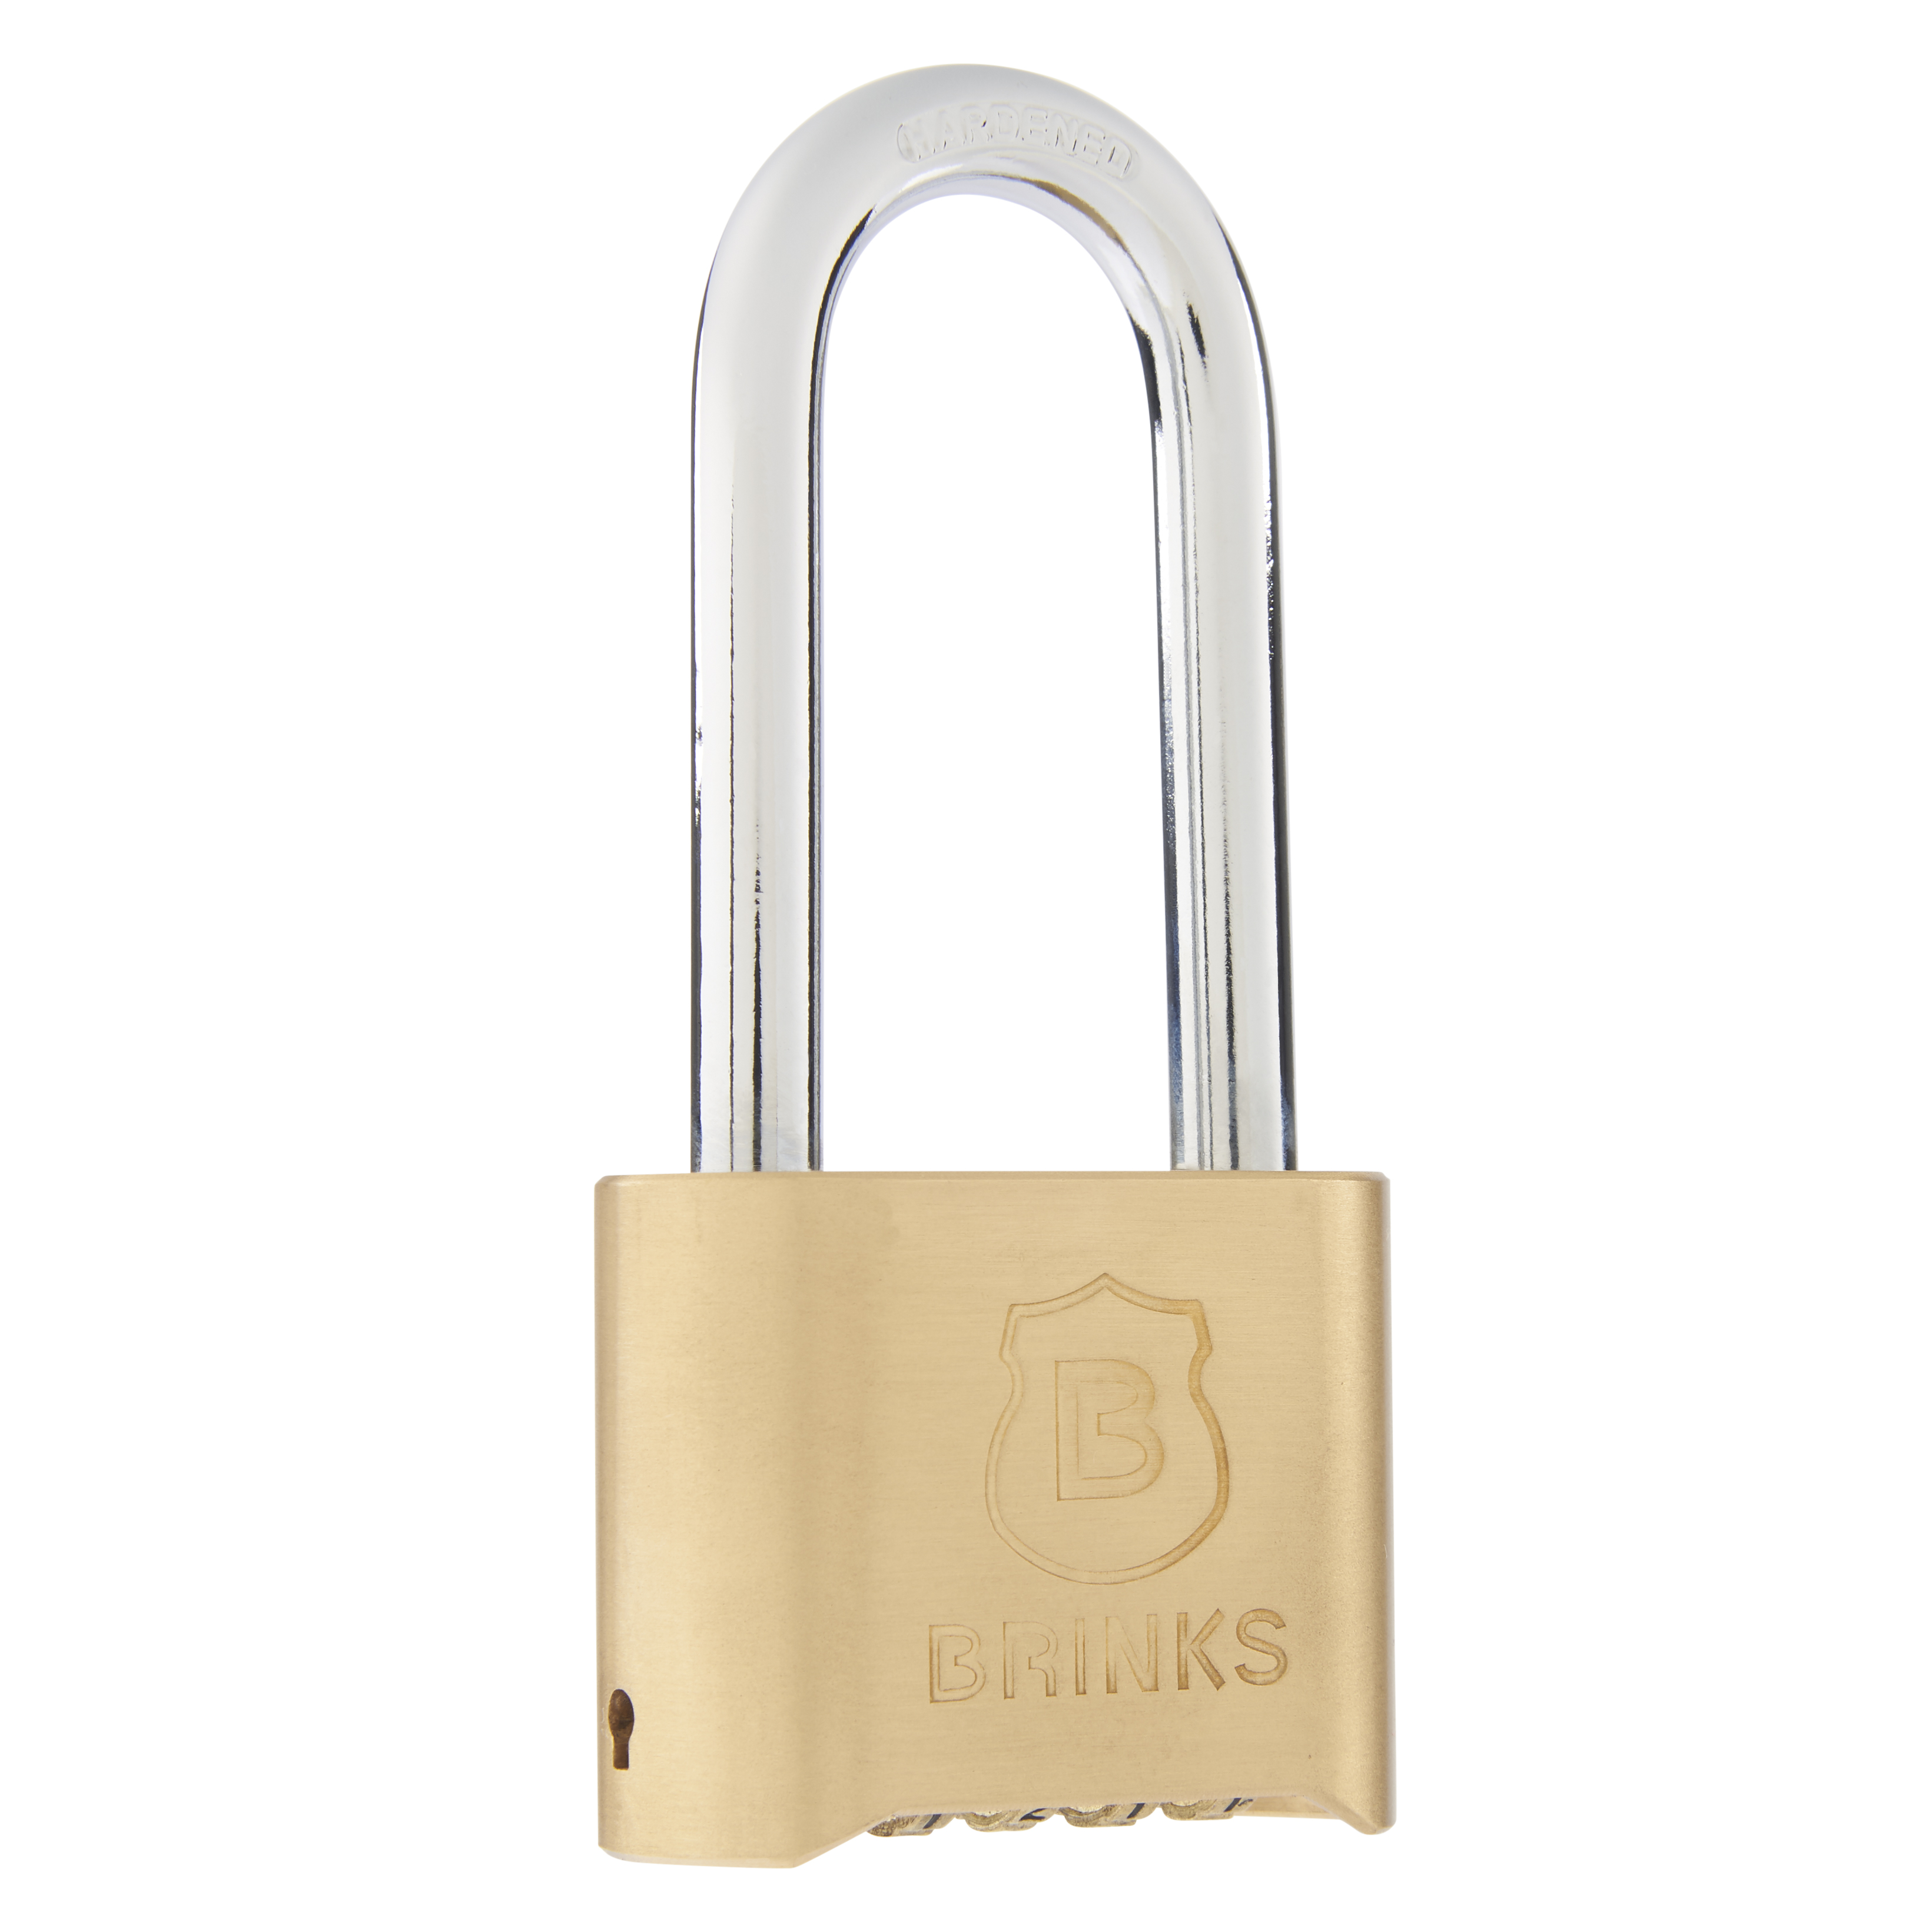 Brinks Solid Brass 50mm Resettable Combination Padlock with 2in Shackle - image 3 of 6